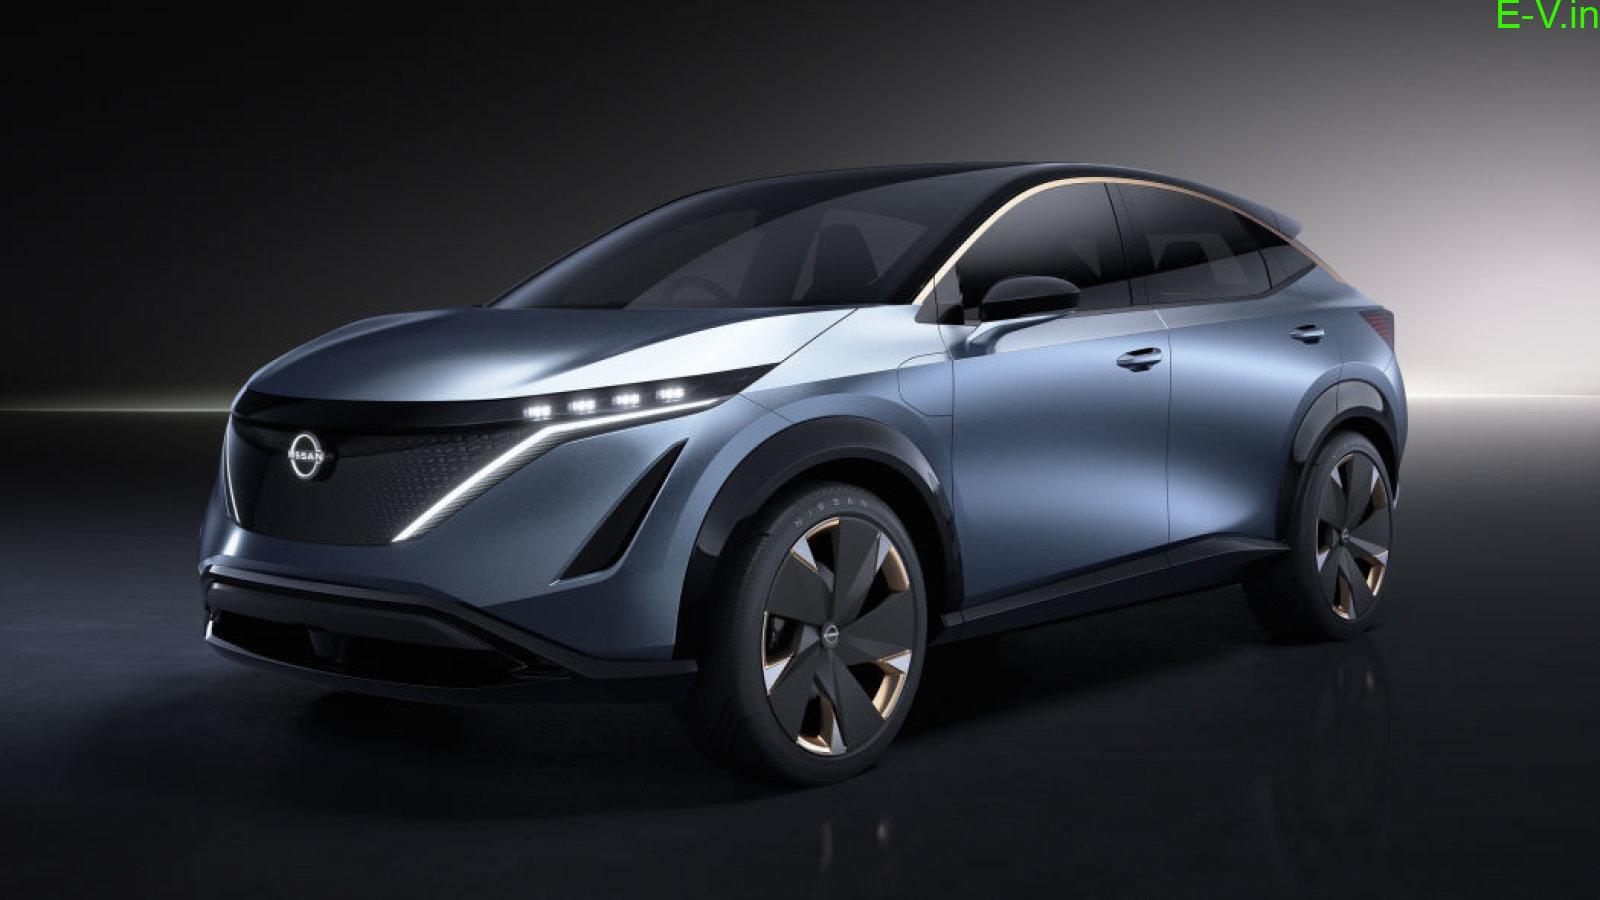 nissan unveiled an electric suv concept ariya at tokyo motor show